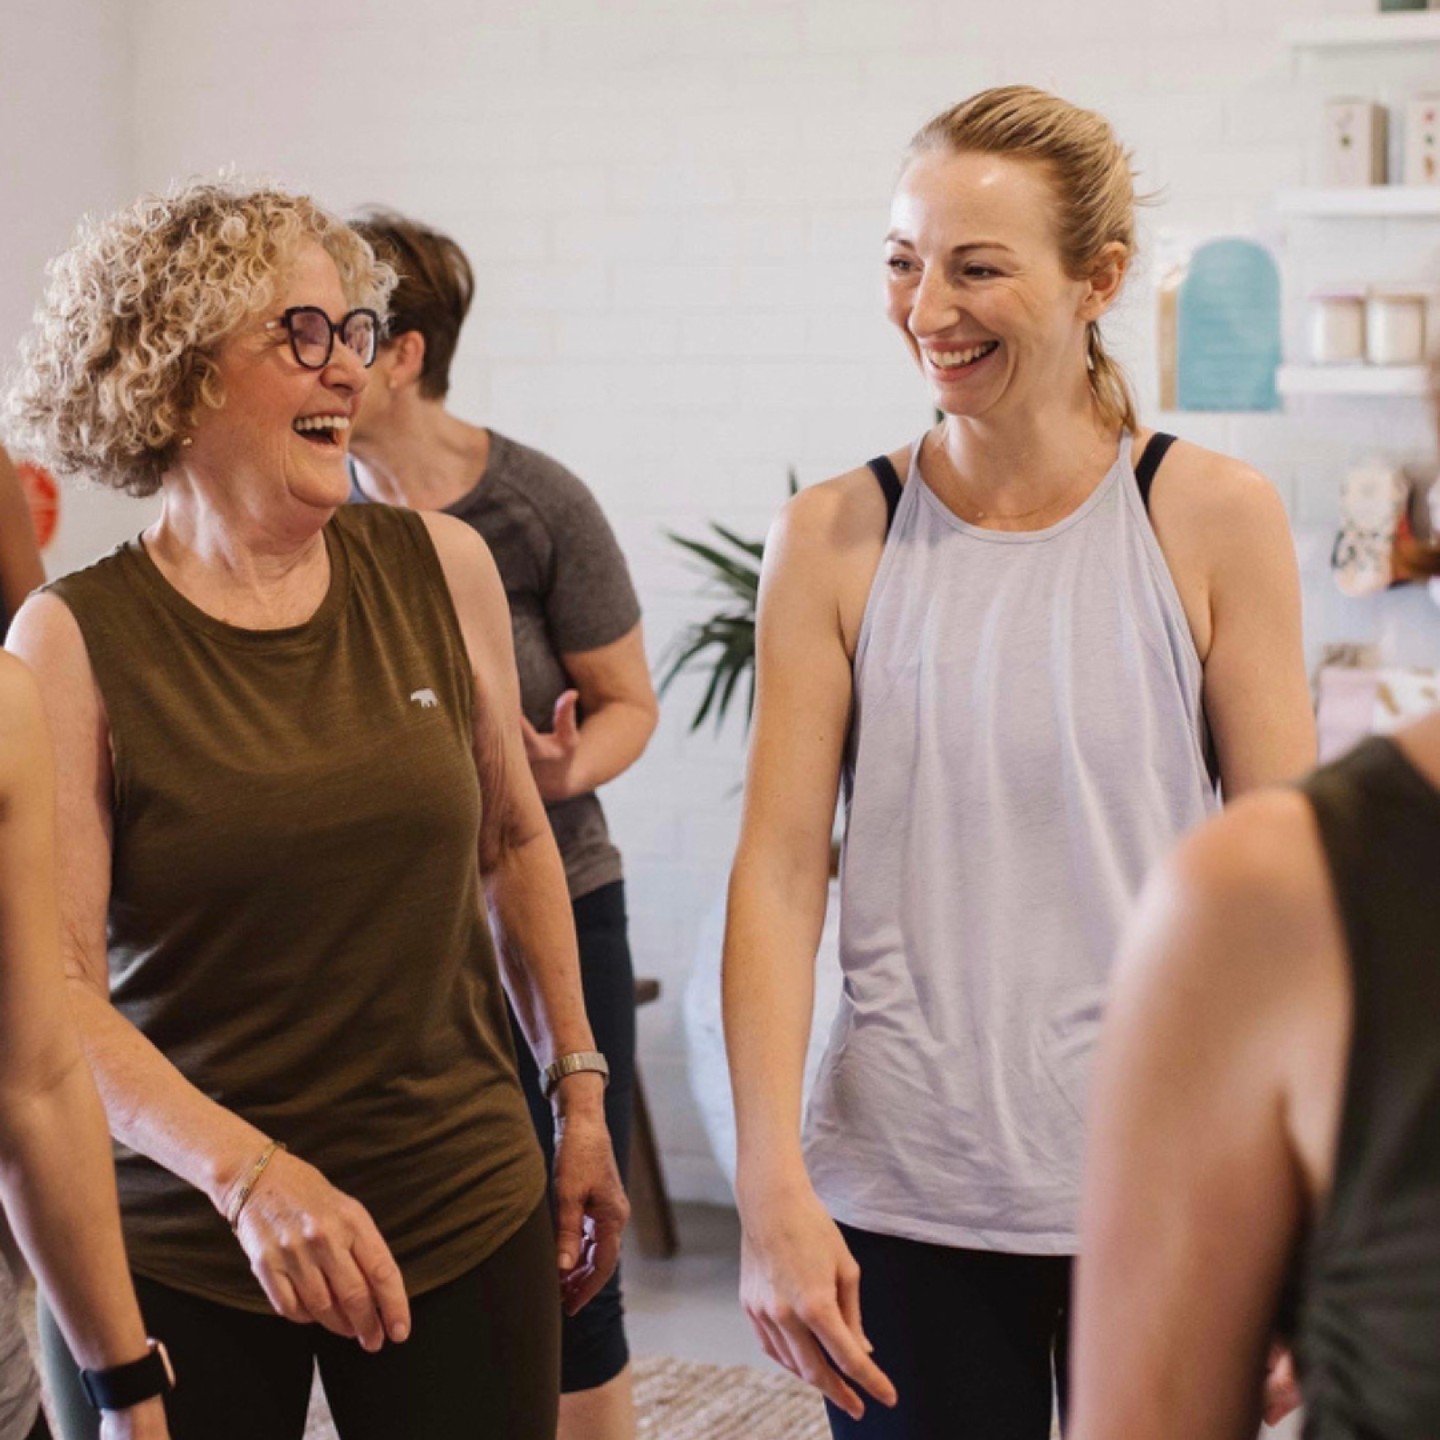 Empowering women through Menopause:

On Monday the 6th of May, Chrissy Freer will take you on a transformative journey through menopause and beyond. Right here at the Lifeworks studio in Ballina.

You'll discover evidence-based strategies to optimize